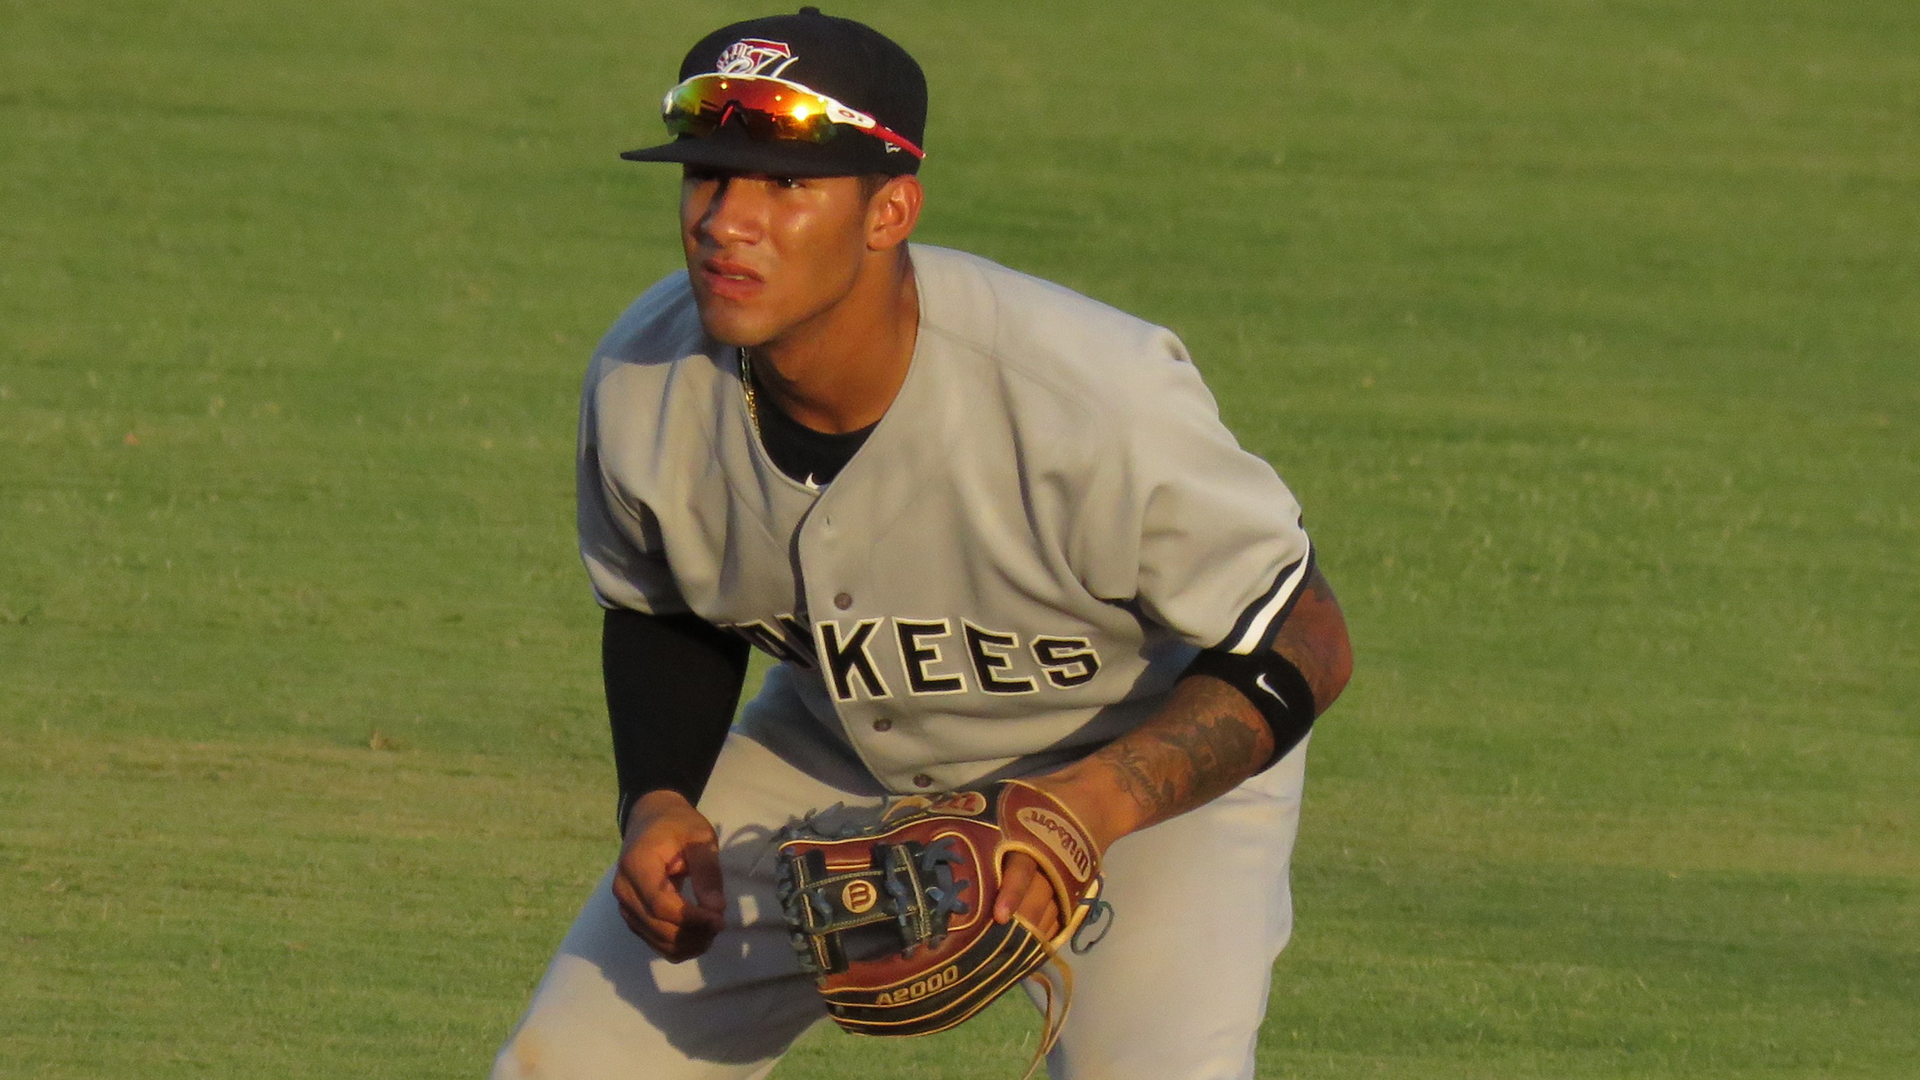 How soon could we see Gleyber Torres in the Bronx?